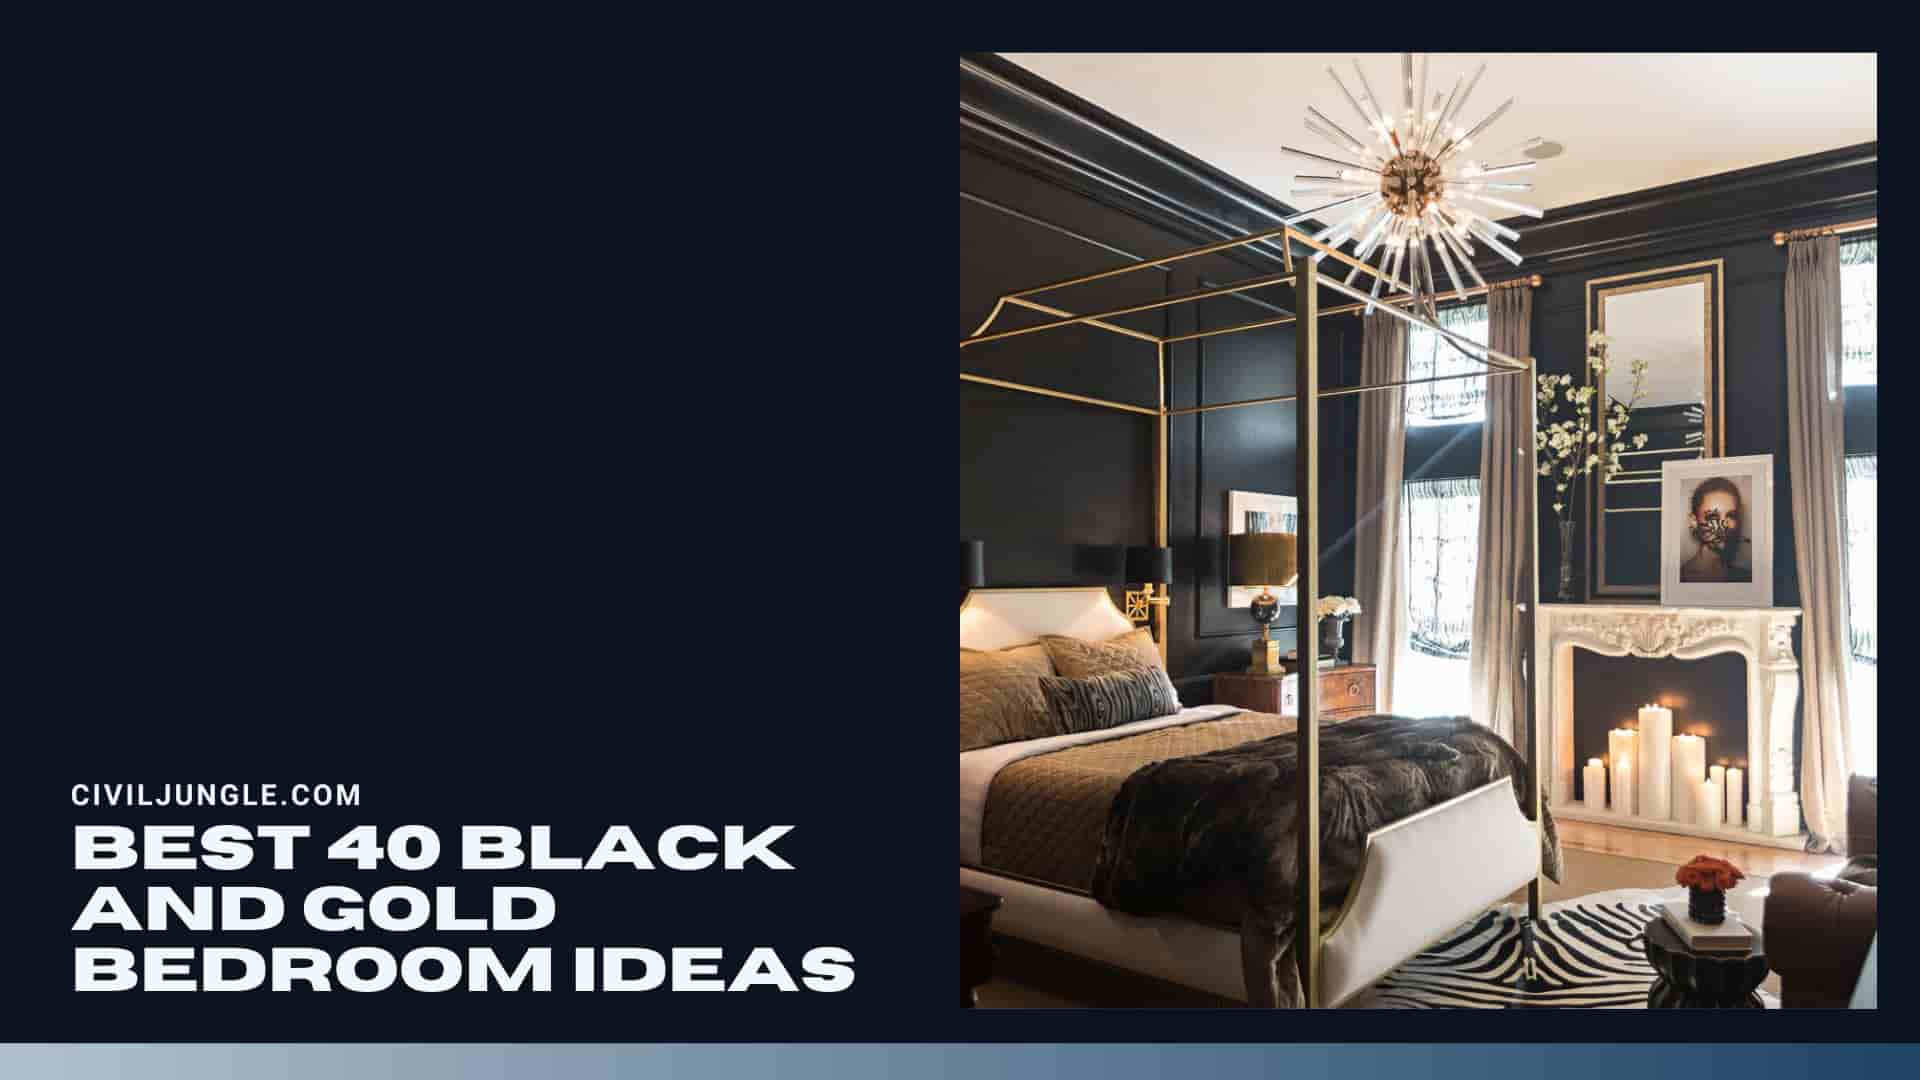 Best 40 Black and Gold Bedroom Ideas